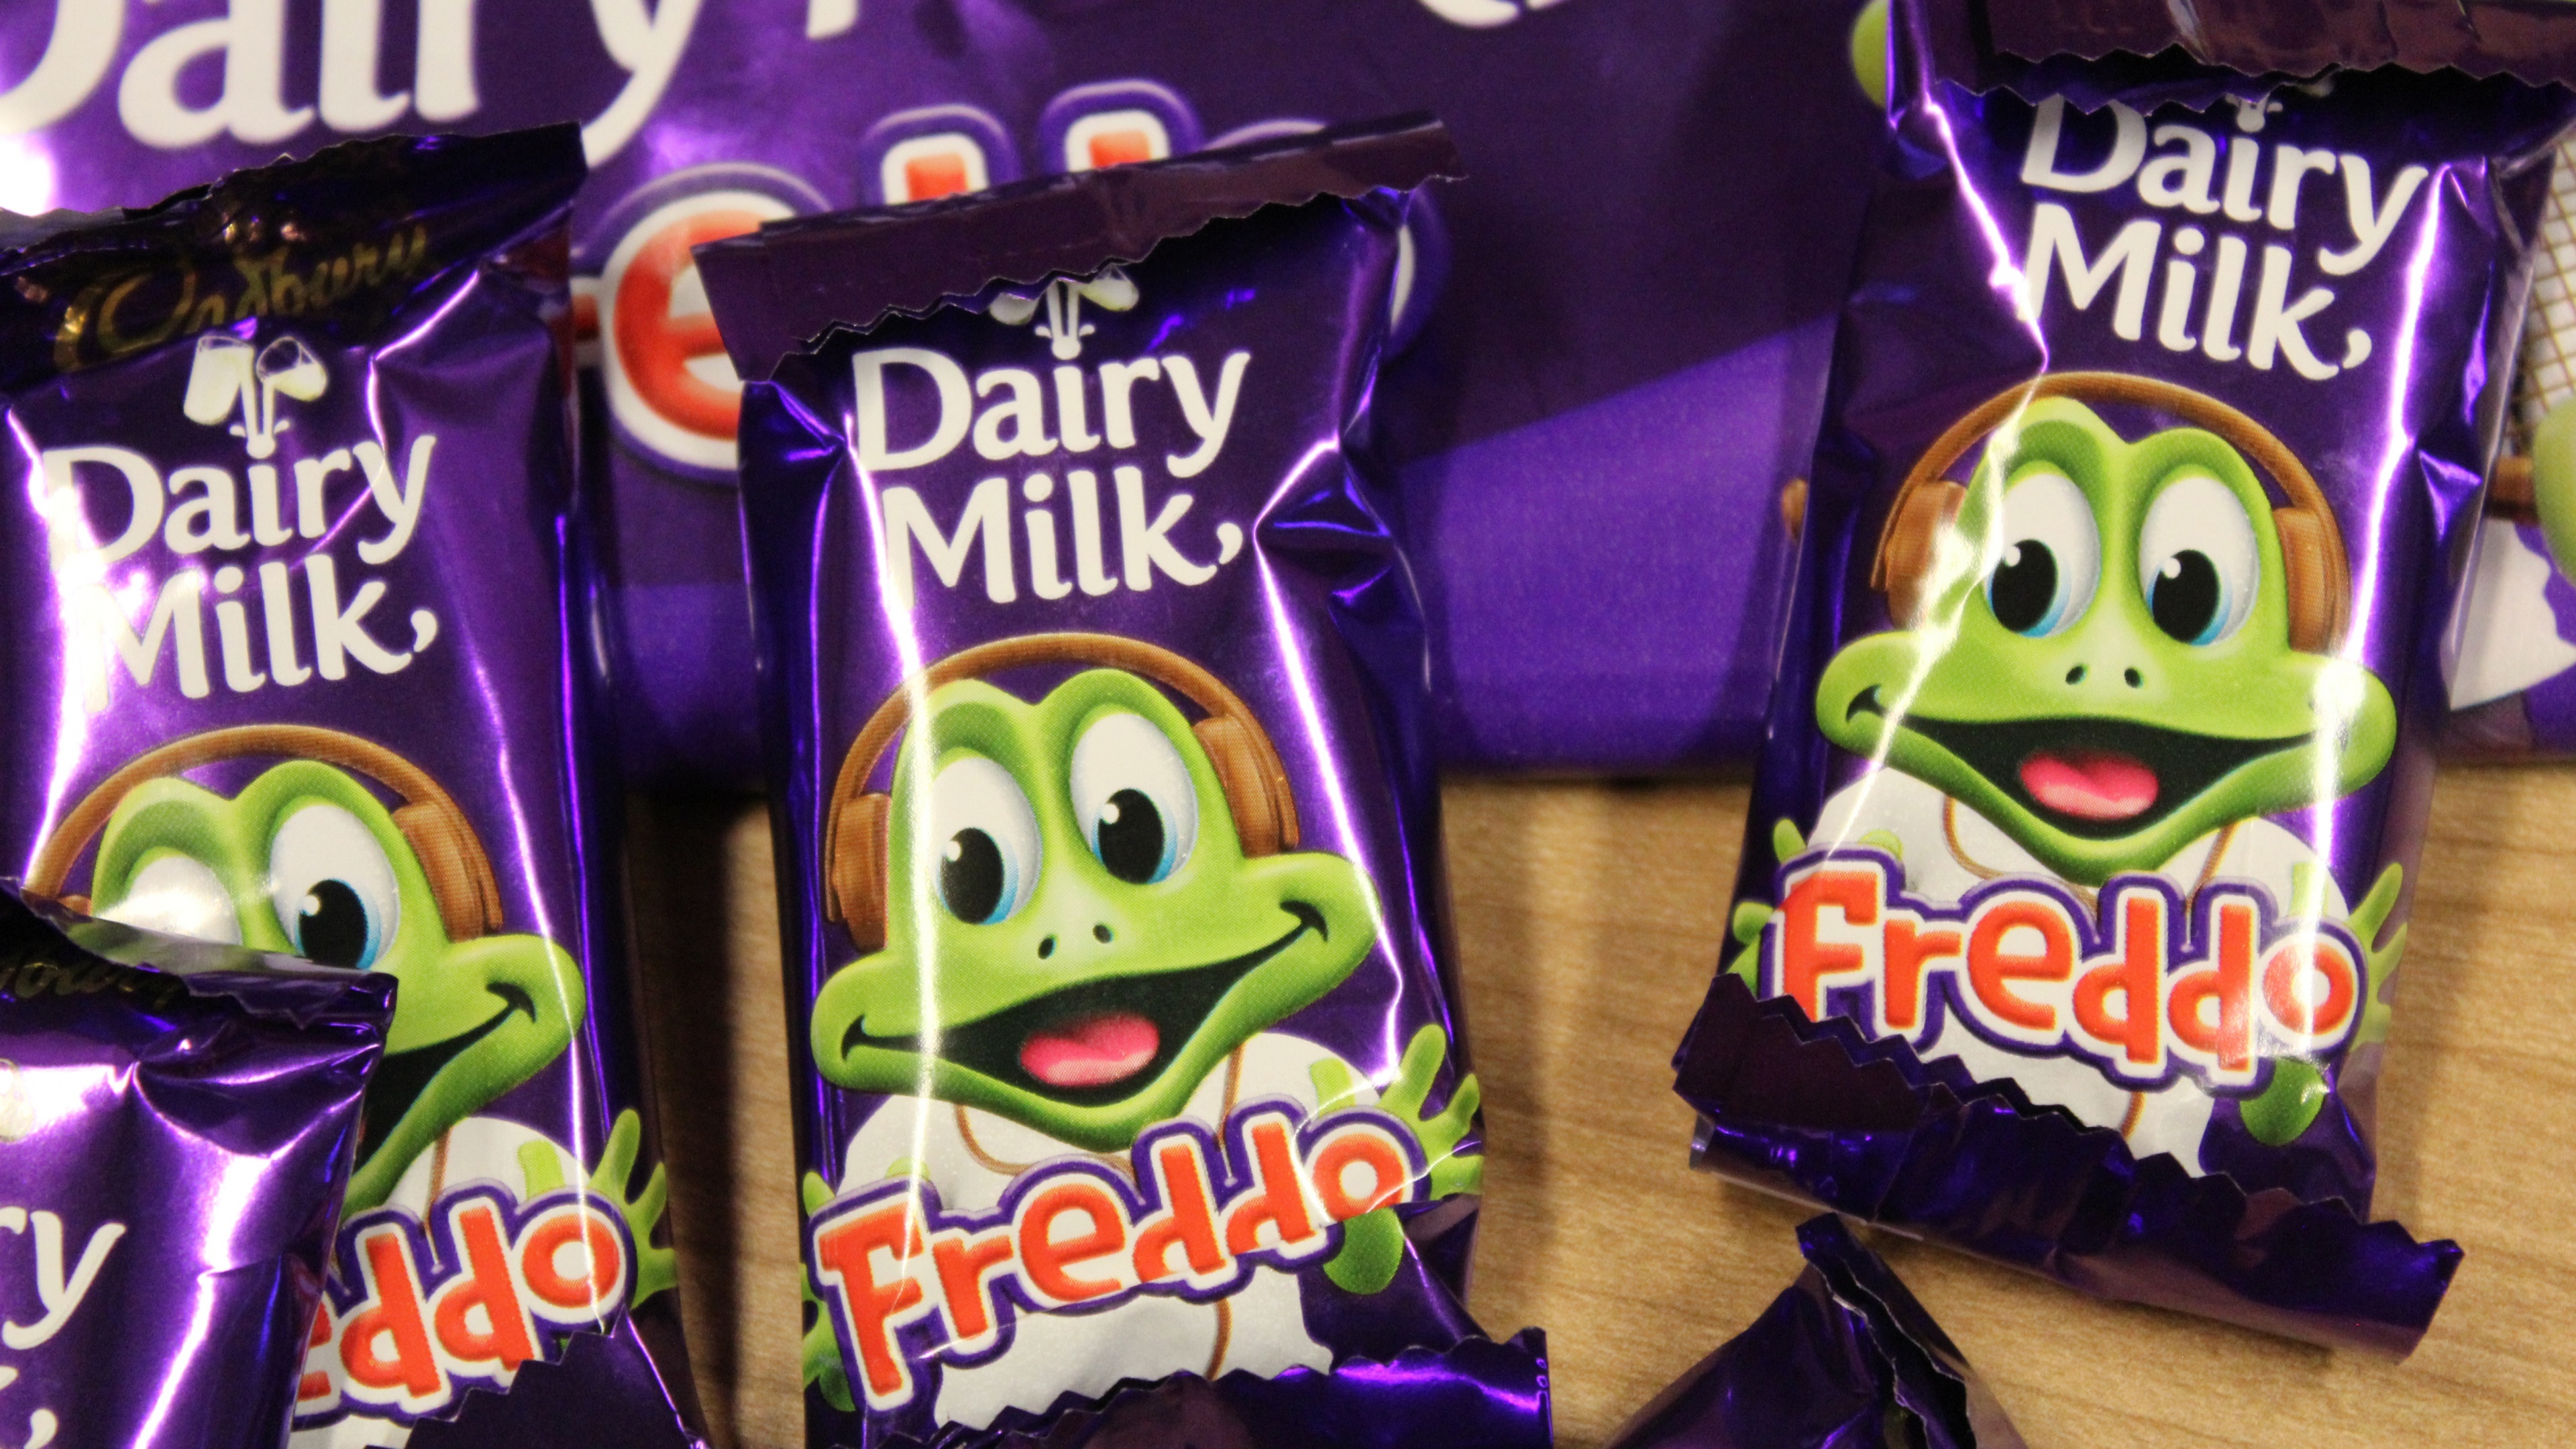 Freddos have been reduced in price by Cadbury (PA)